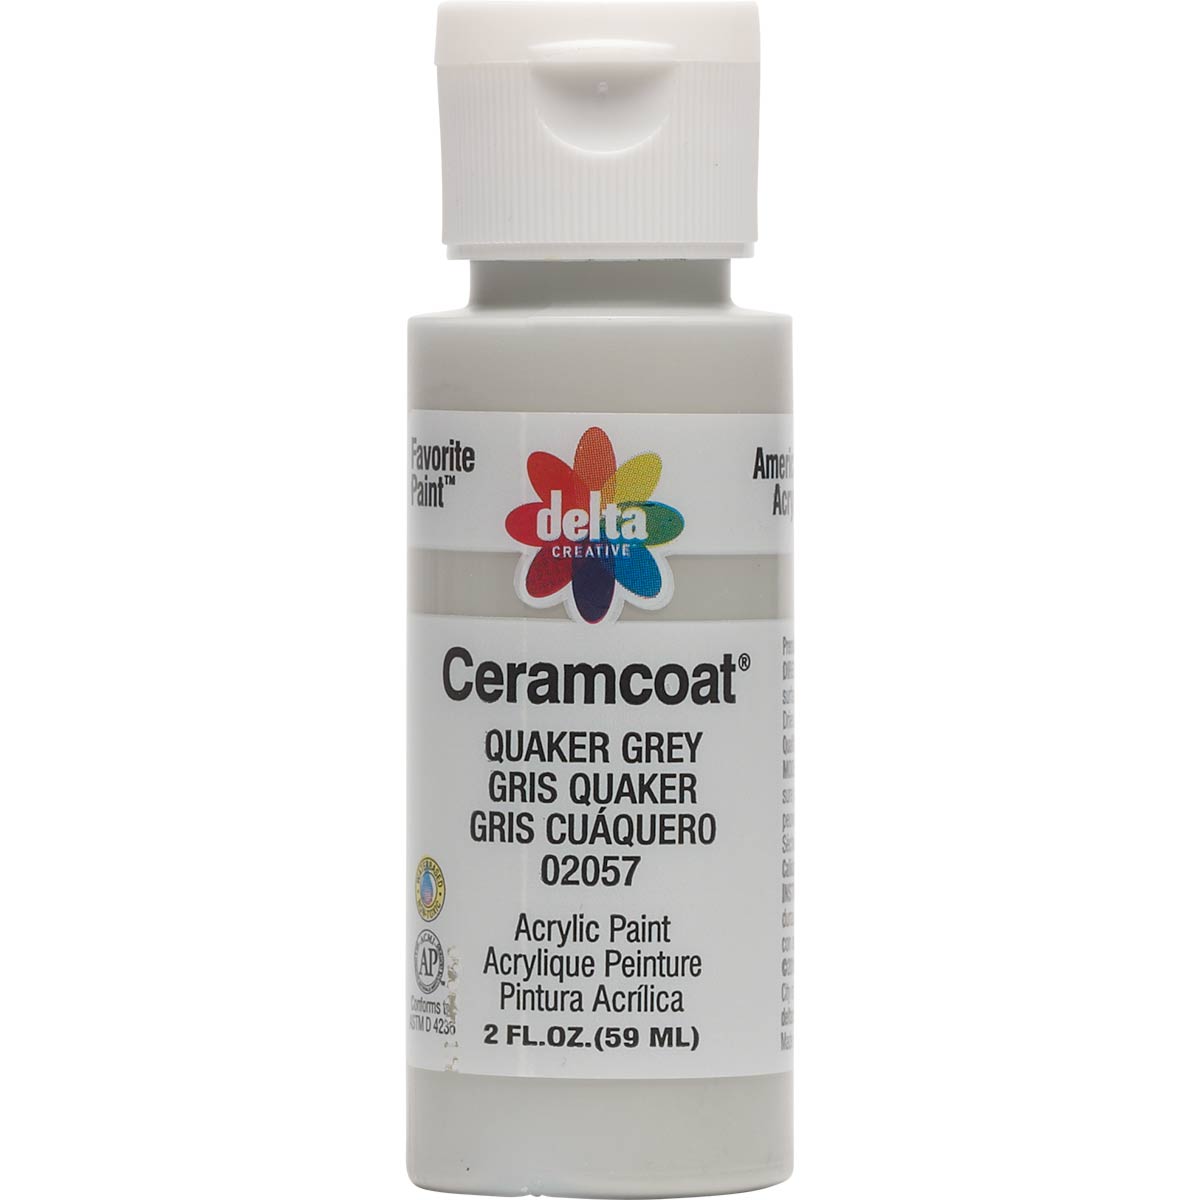 Ce02069~2098 Plaid:delta Ceramcoat Acrylic Paint, 2-ounce, Creamy Smooth  Consistency For One Coat Coverage, Art Supplies - Water Color - AliExpress